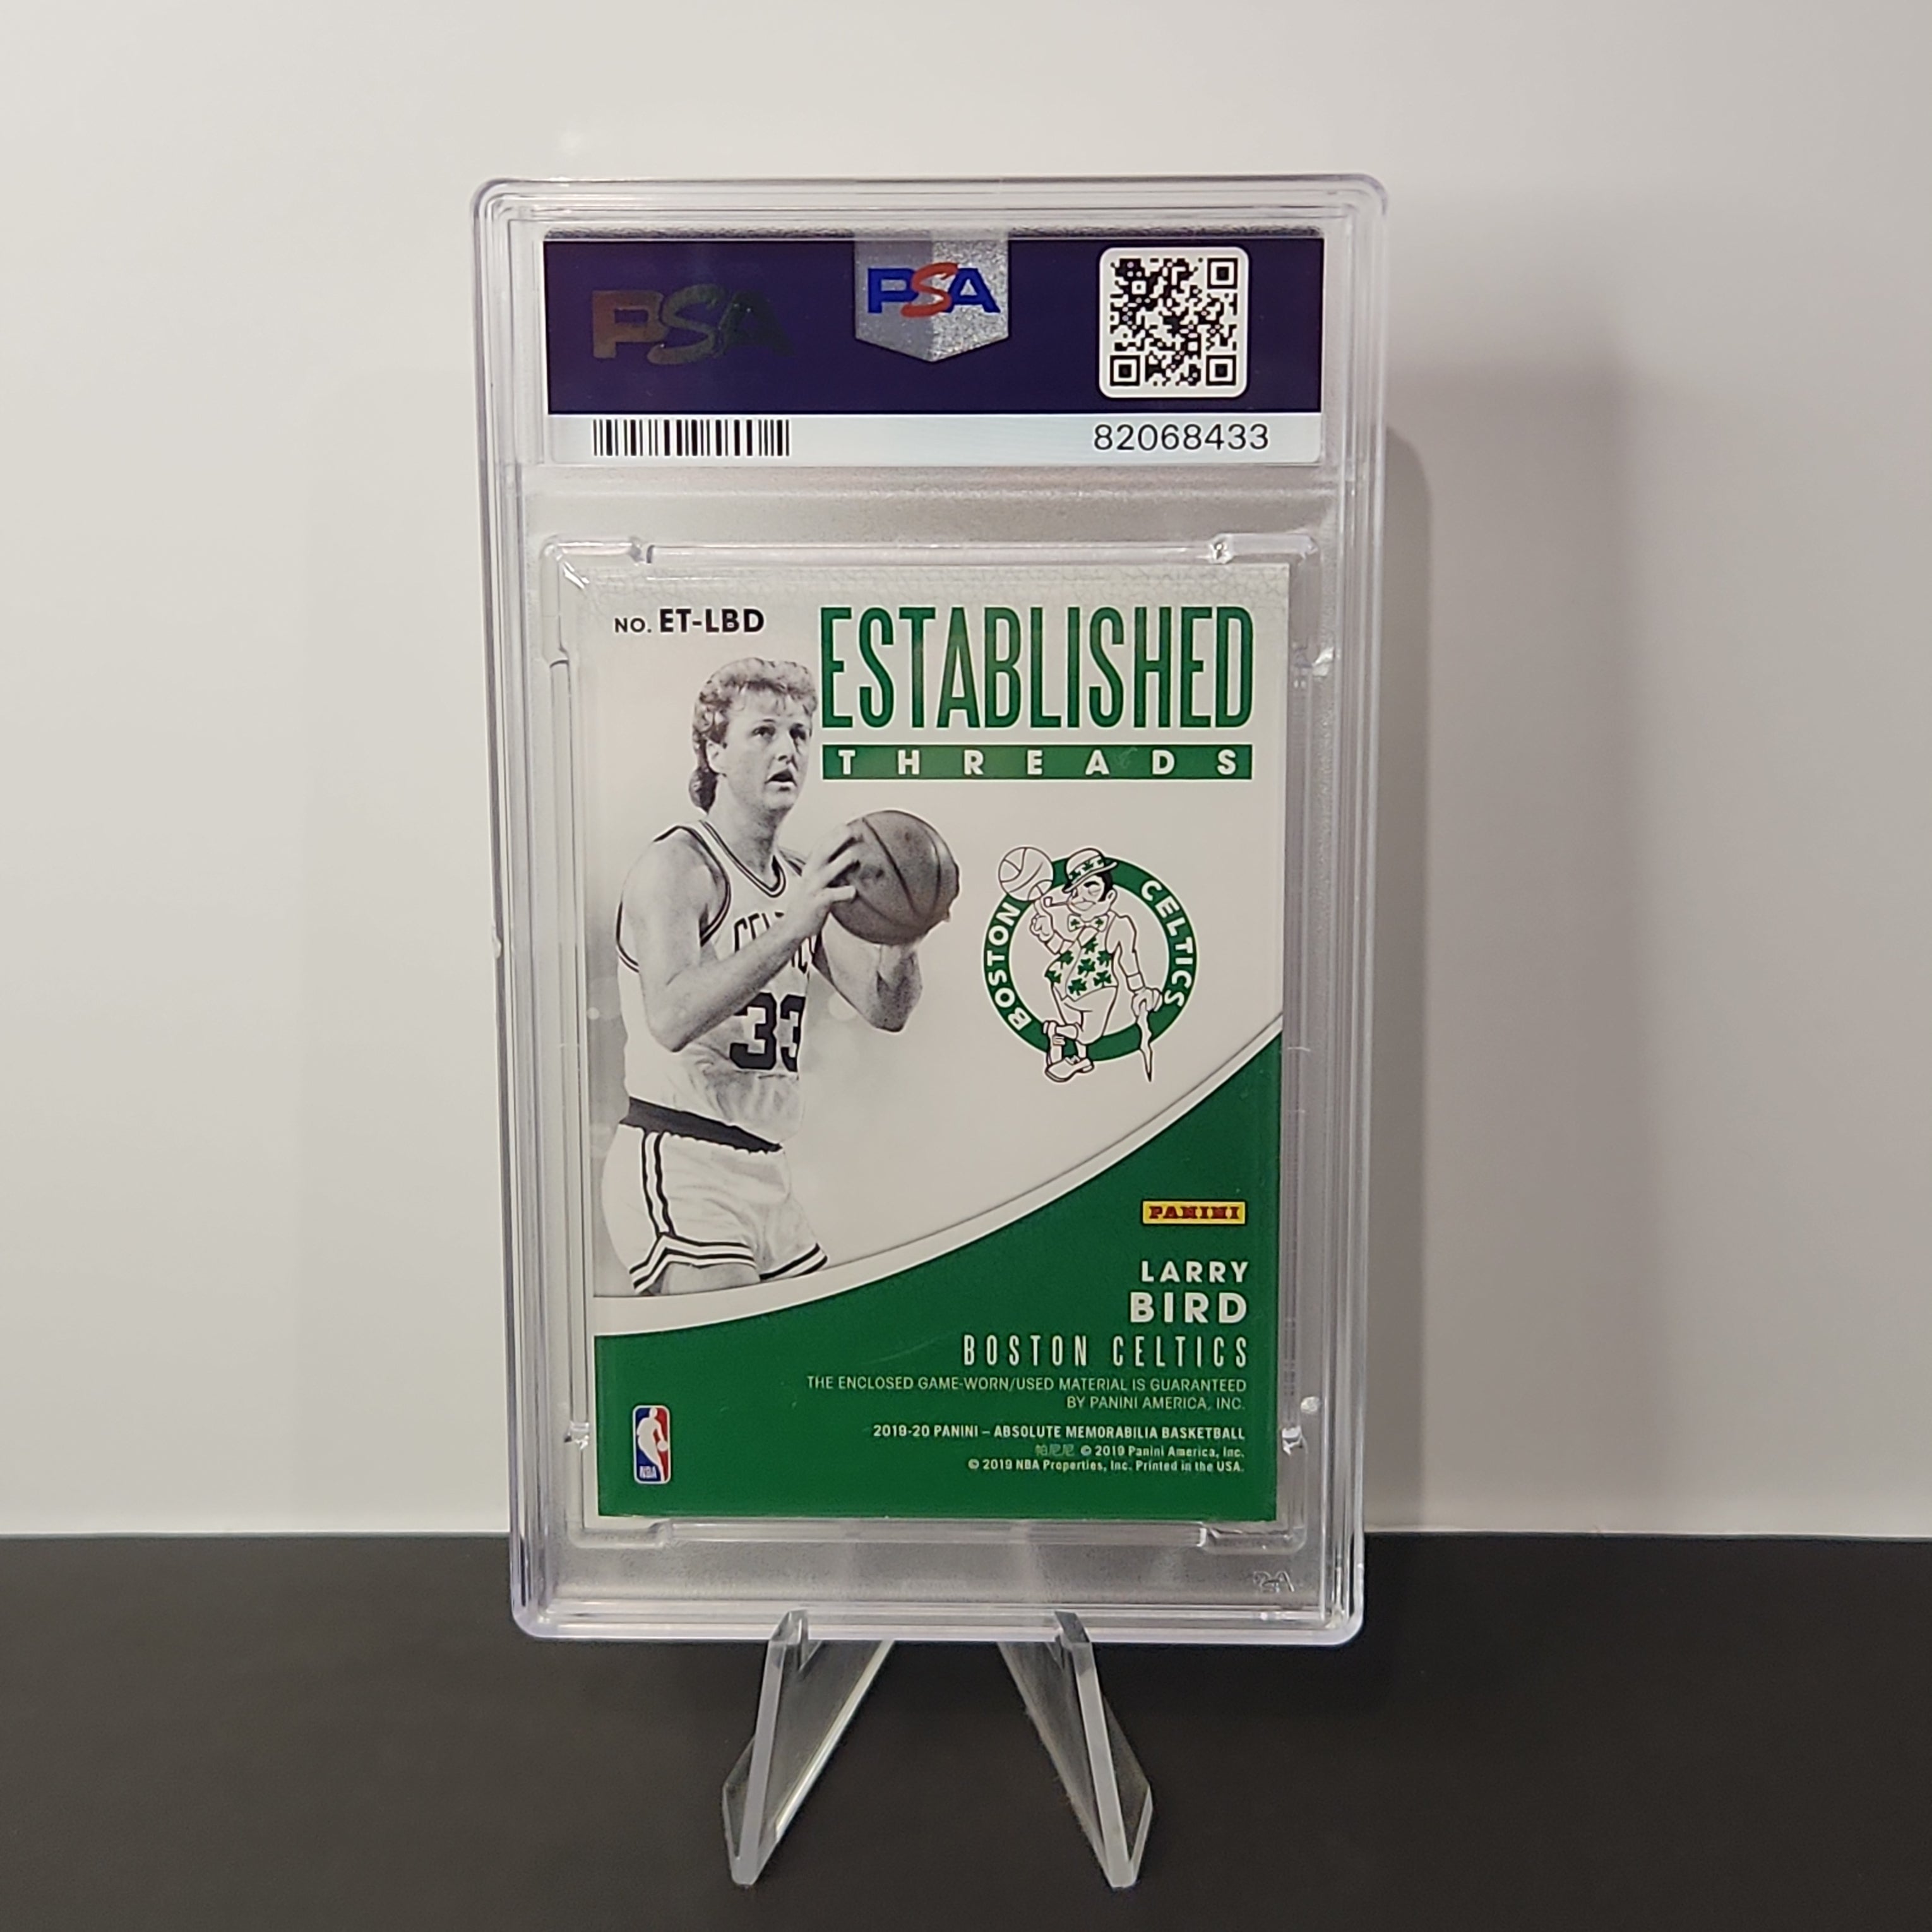 Larry Bird 2019/20 Absolute Memorabilia Threads Level 1 **PSA MINT 9** - Premium  from 1of1 Collectables - Just $135! Shop now at 1of1 Collectables